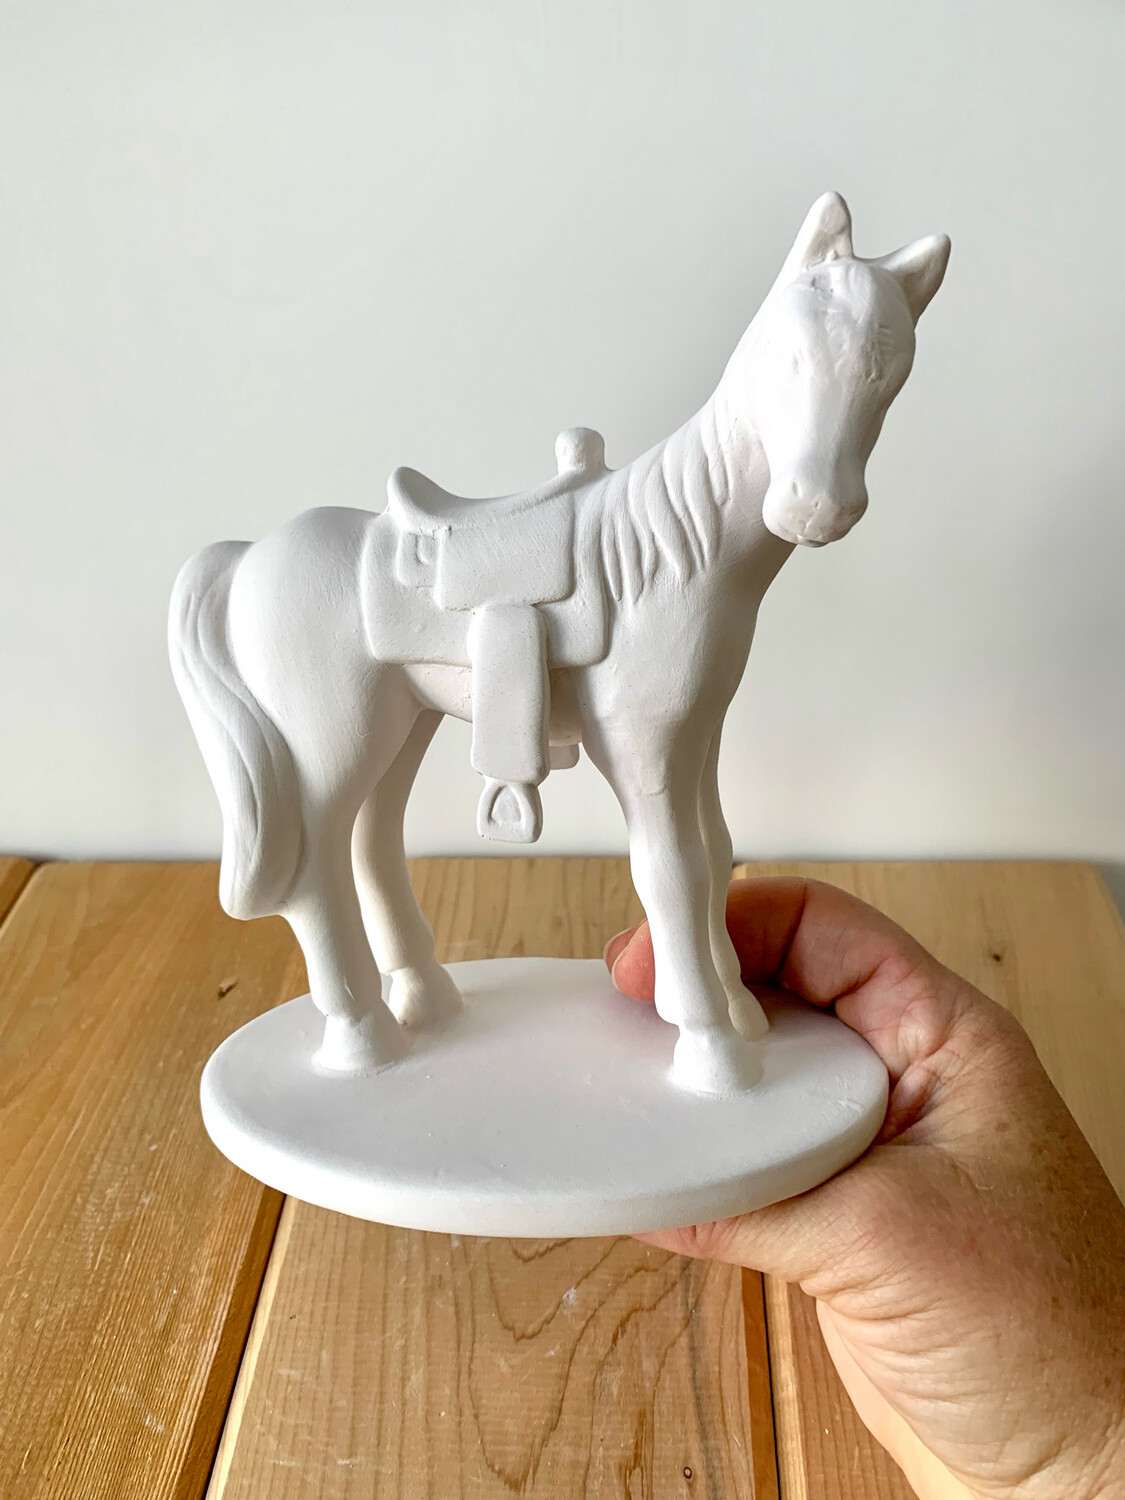 Paint Your Own Pottery - Ceramic
Horse with Saddle Figurine Painting Kit